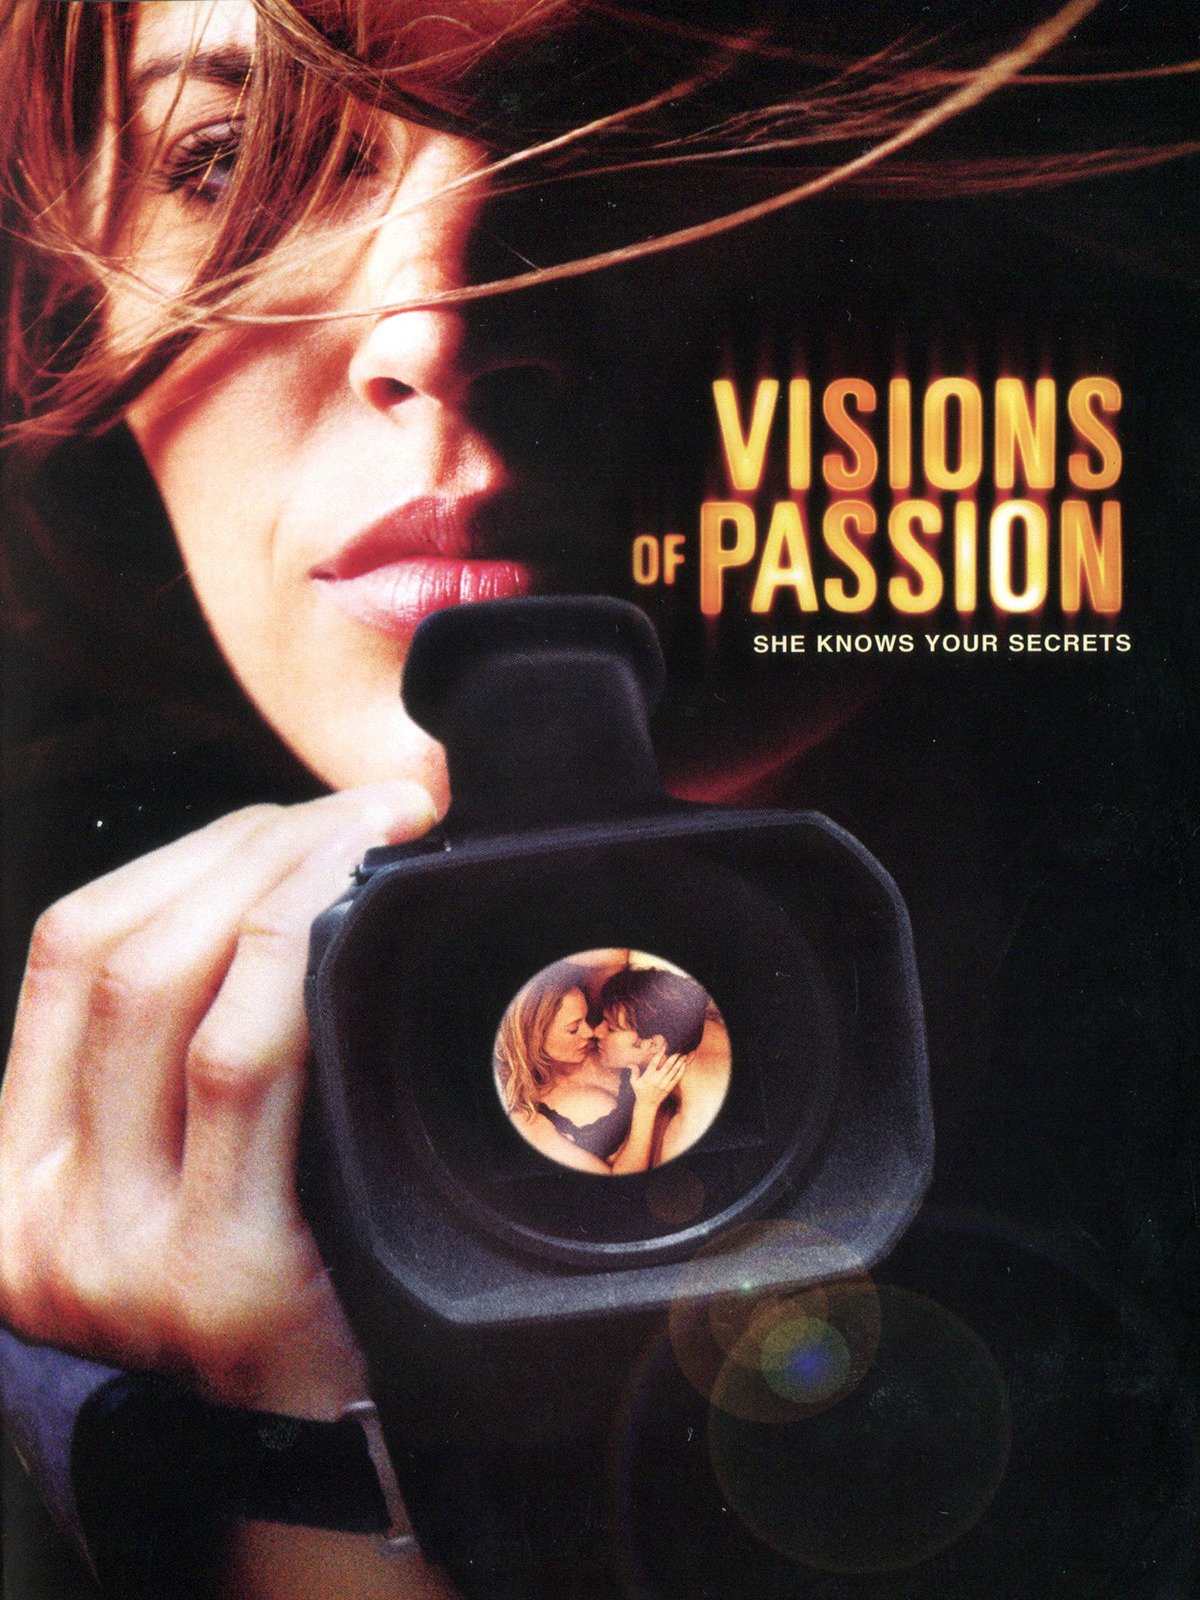 Visions of Passion (2003) starring Mia Zottoli on DVD on DVD